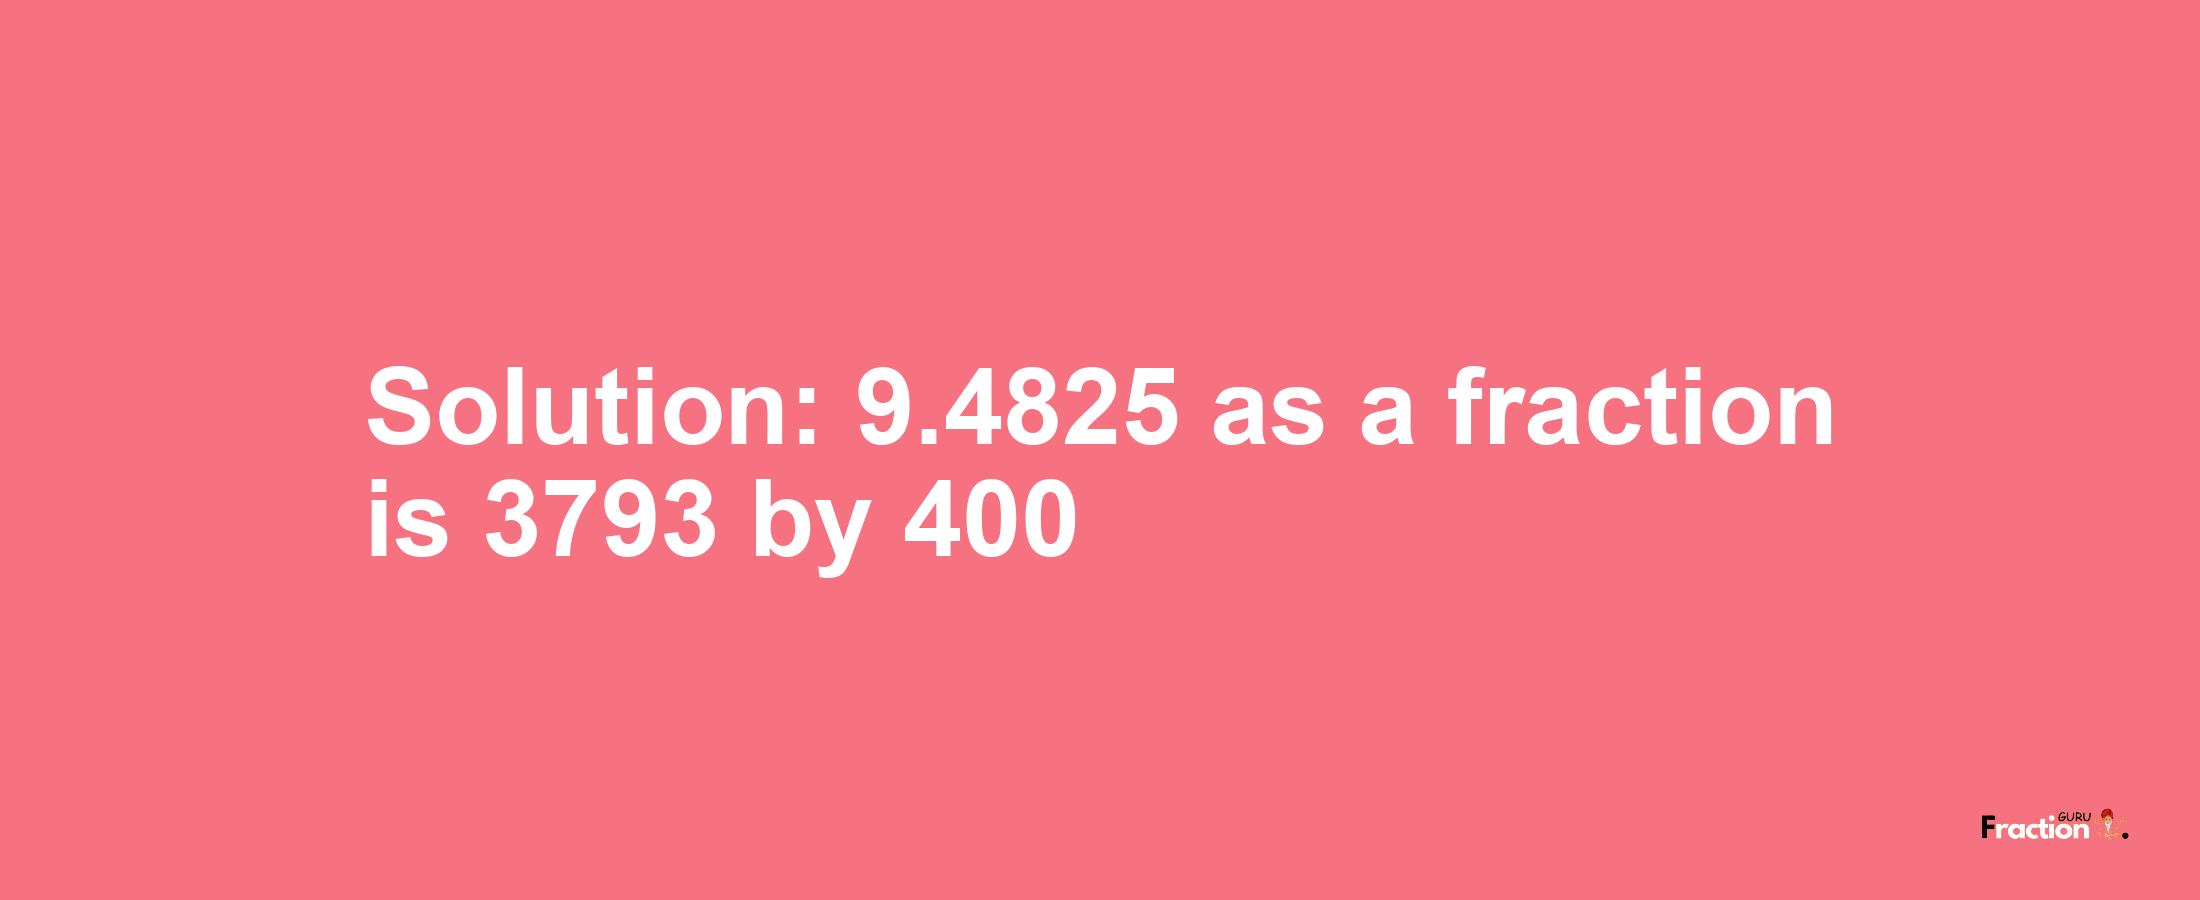 Solution:9.4825 as a fraction is 3793/400